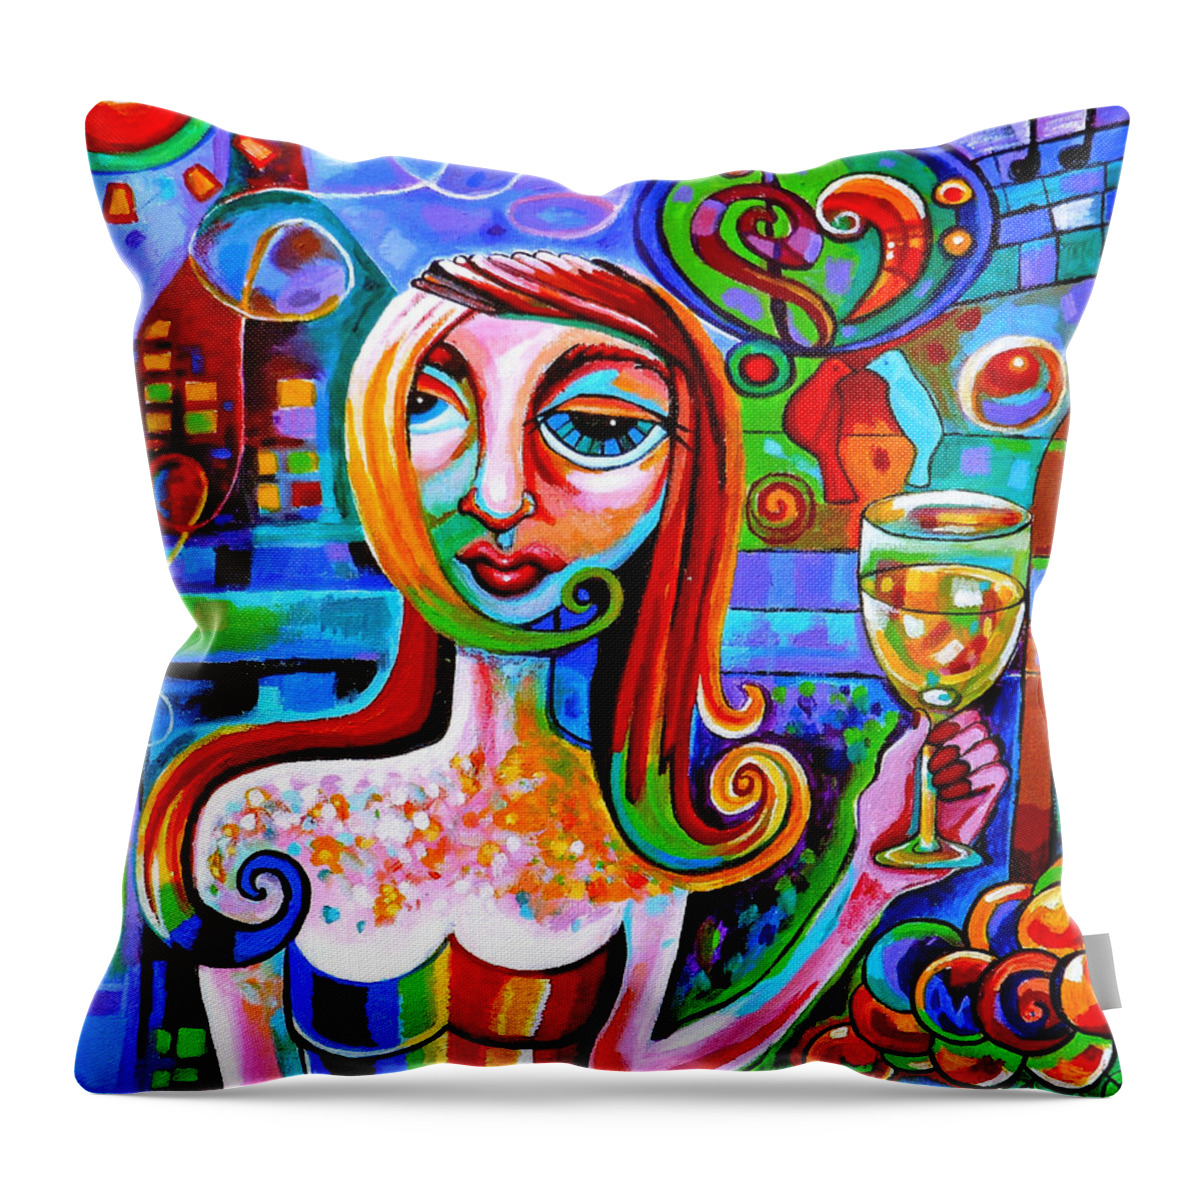 Wine Throw Pillow featuring the painting Girl With Glass Of Chardonnay by Genevieve Esson